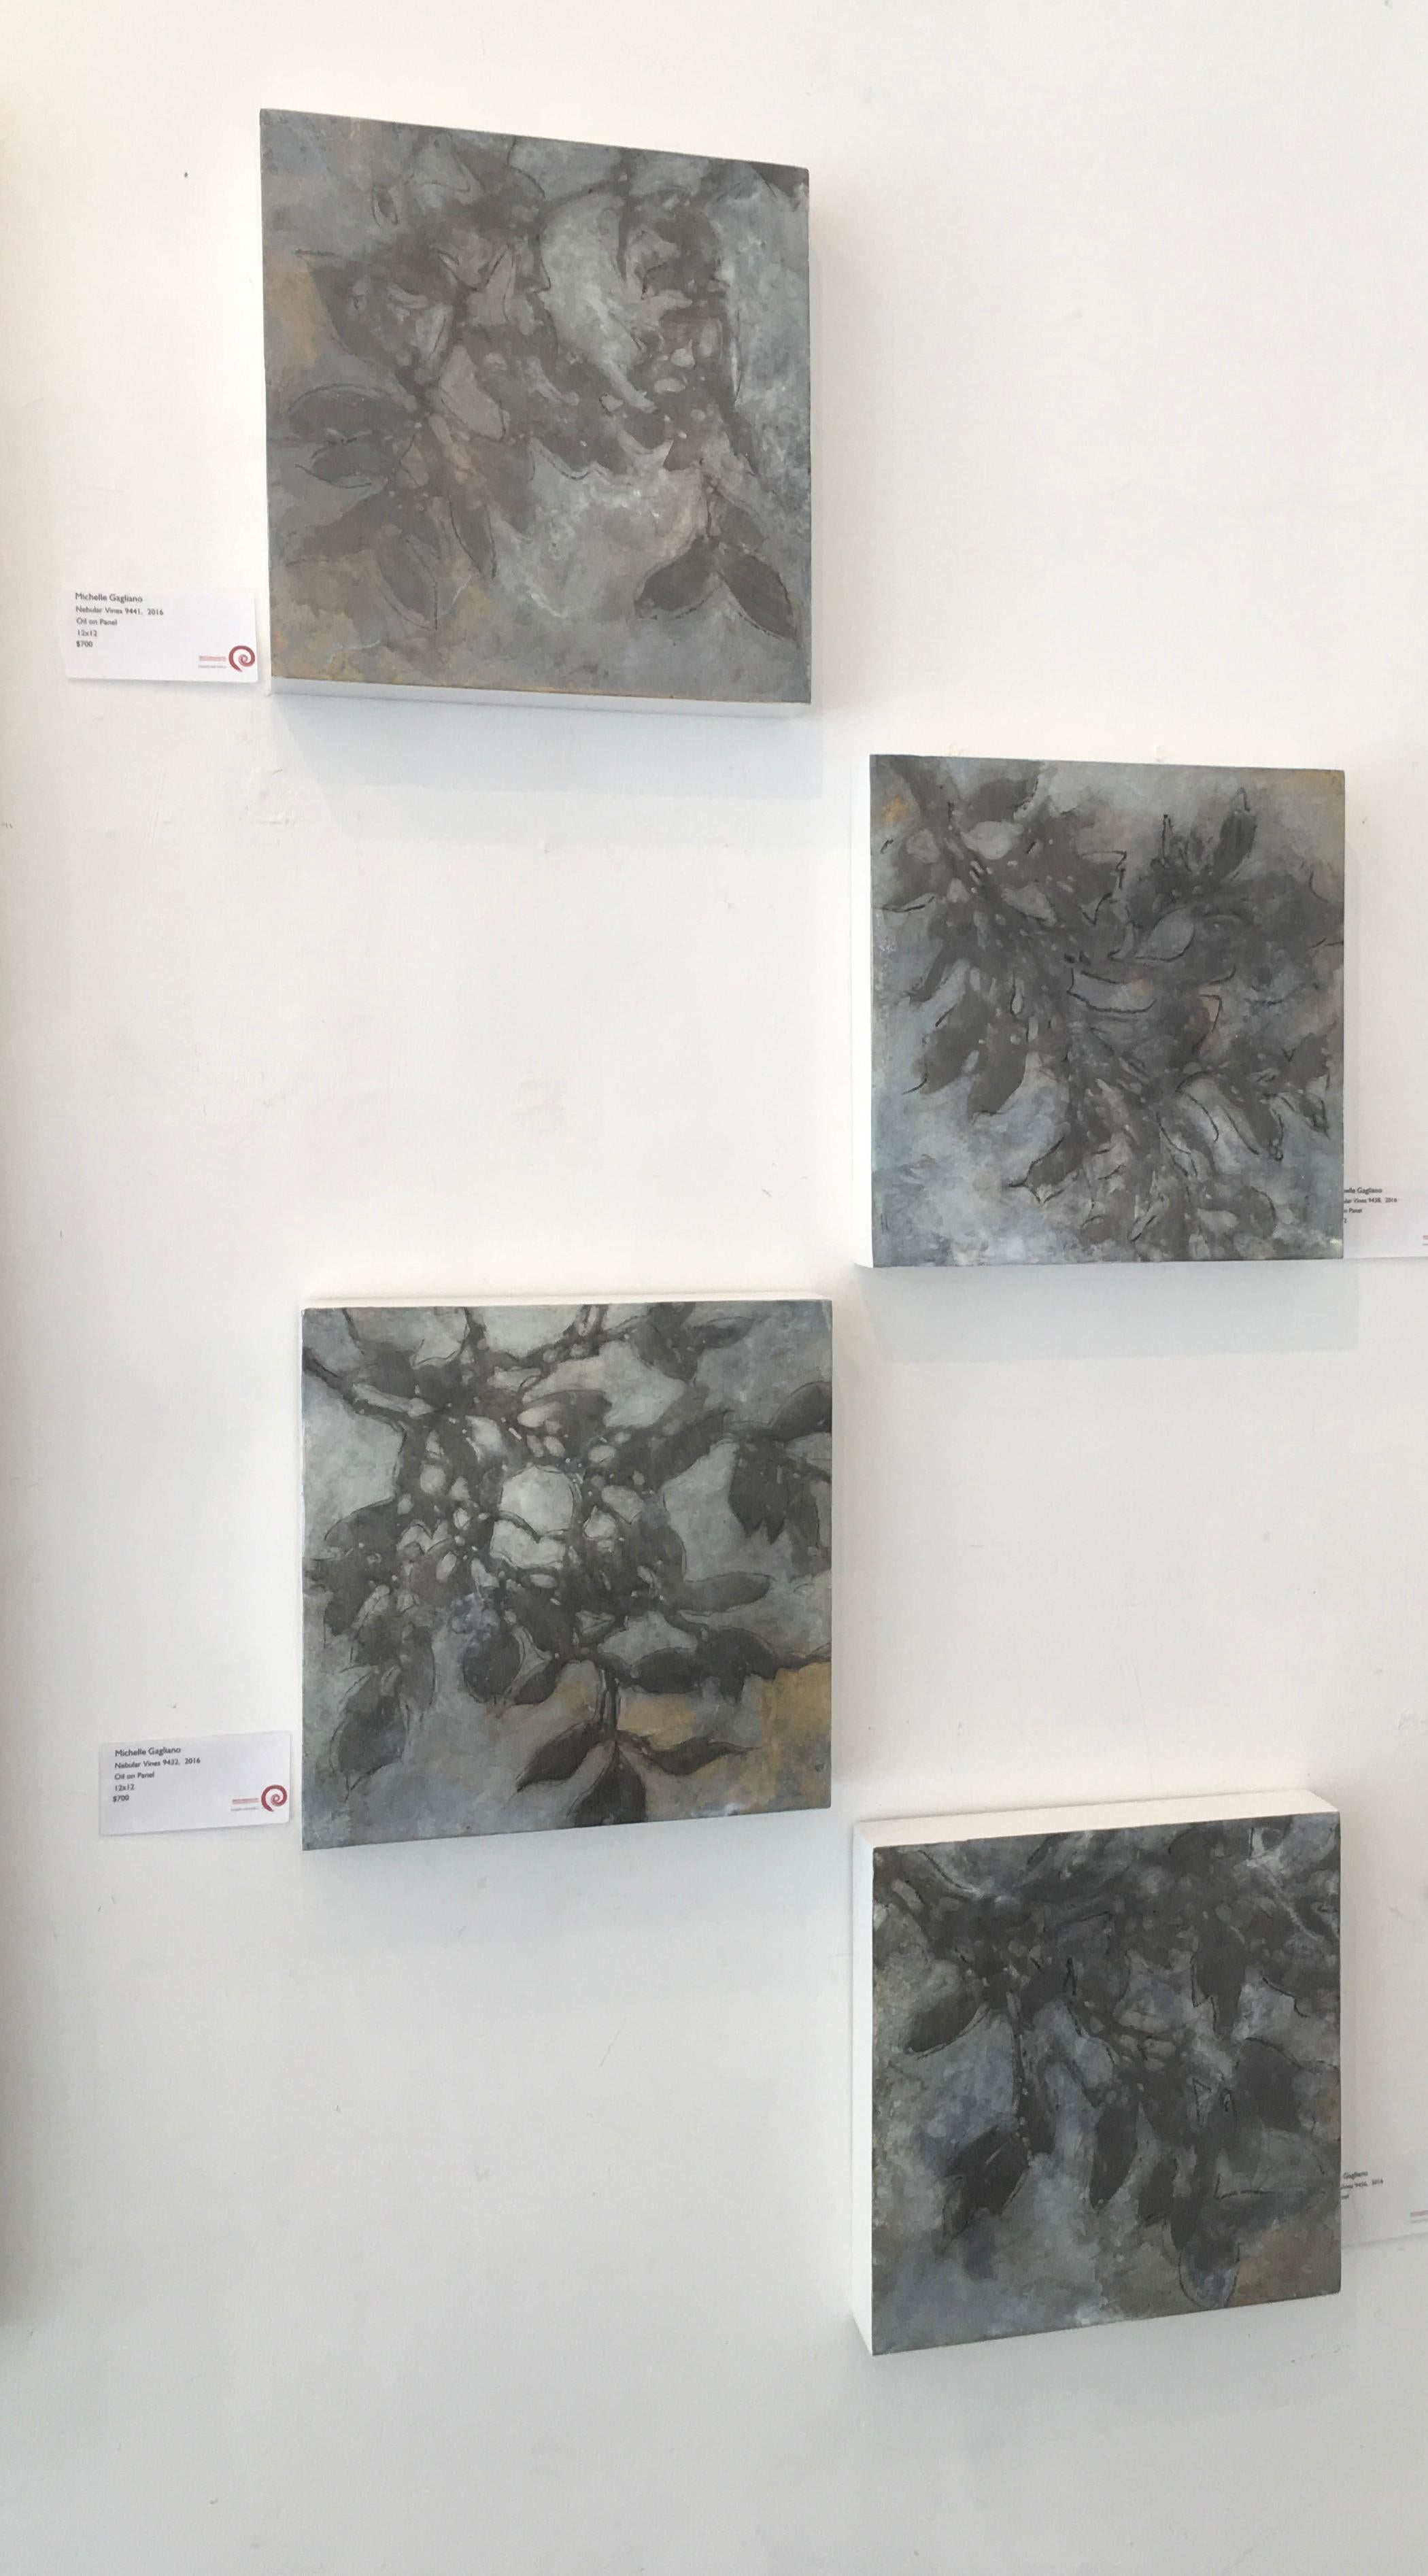 Nebular Vines 9456, botanical, Nature, Vines, Silver, Leaves, Wood Panel,  - Gray Landscape Painting by Michelle Gagliano